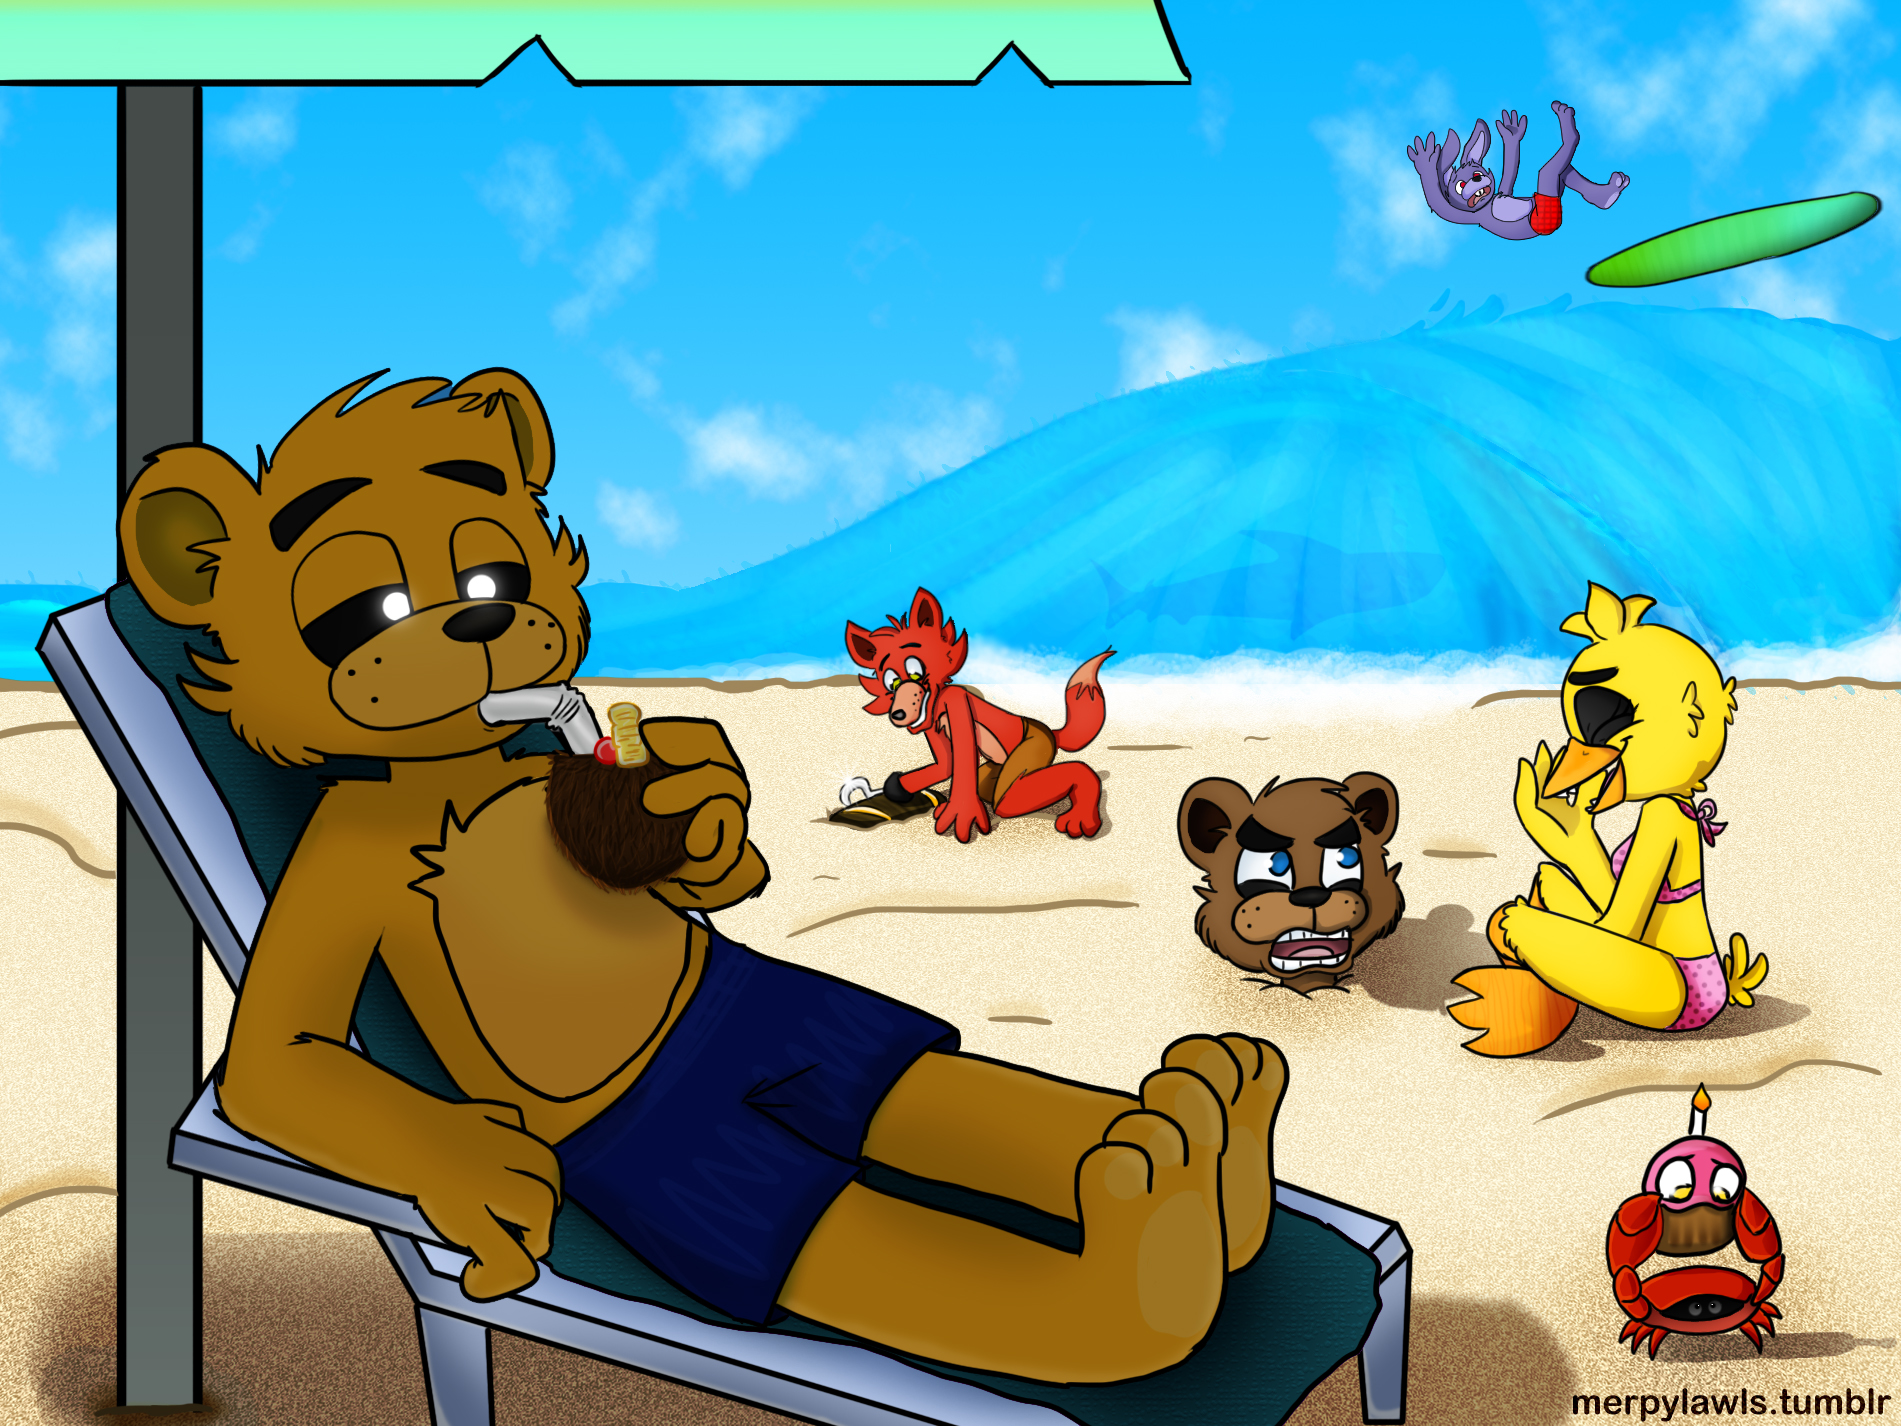 Wallpaper Anime Fnaf1 at the beach by Painted-Treasure on DeviantArt